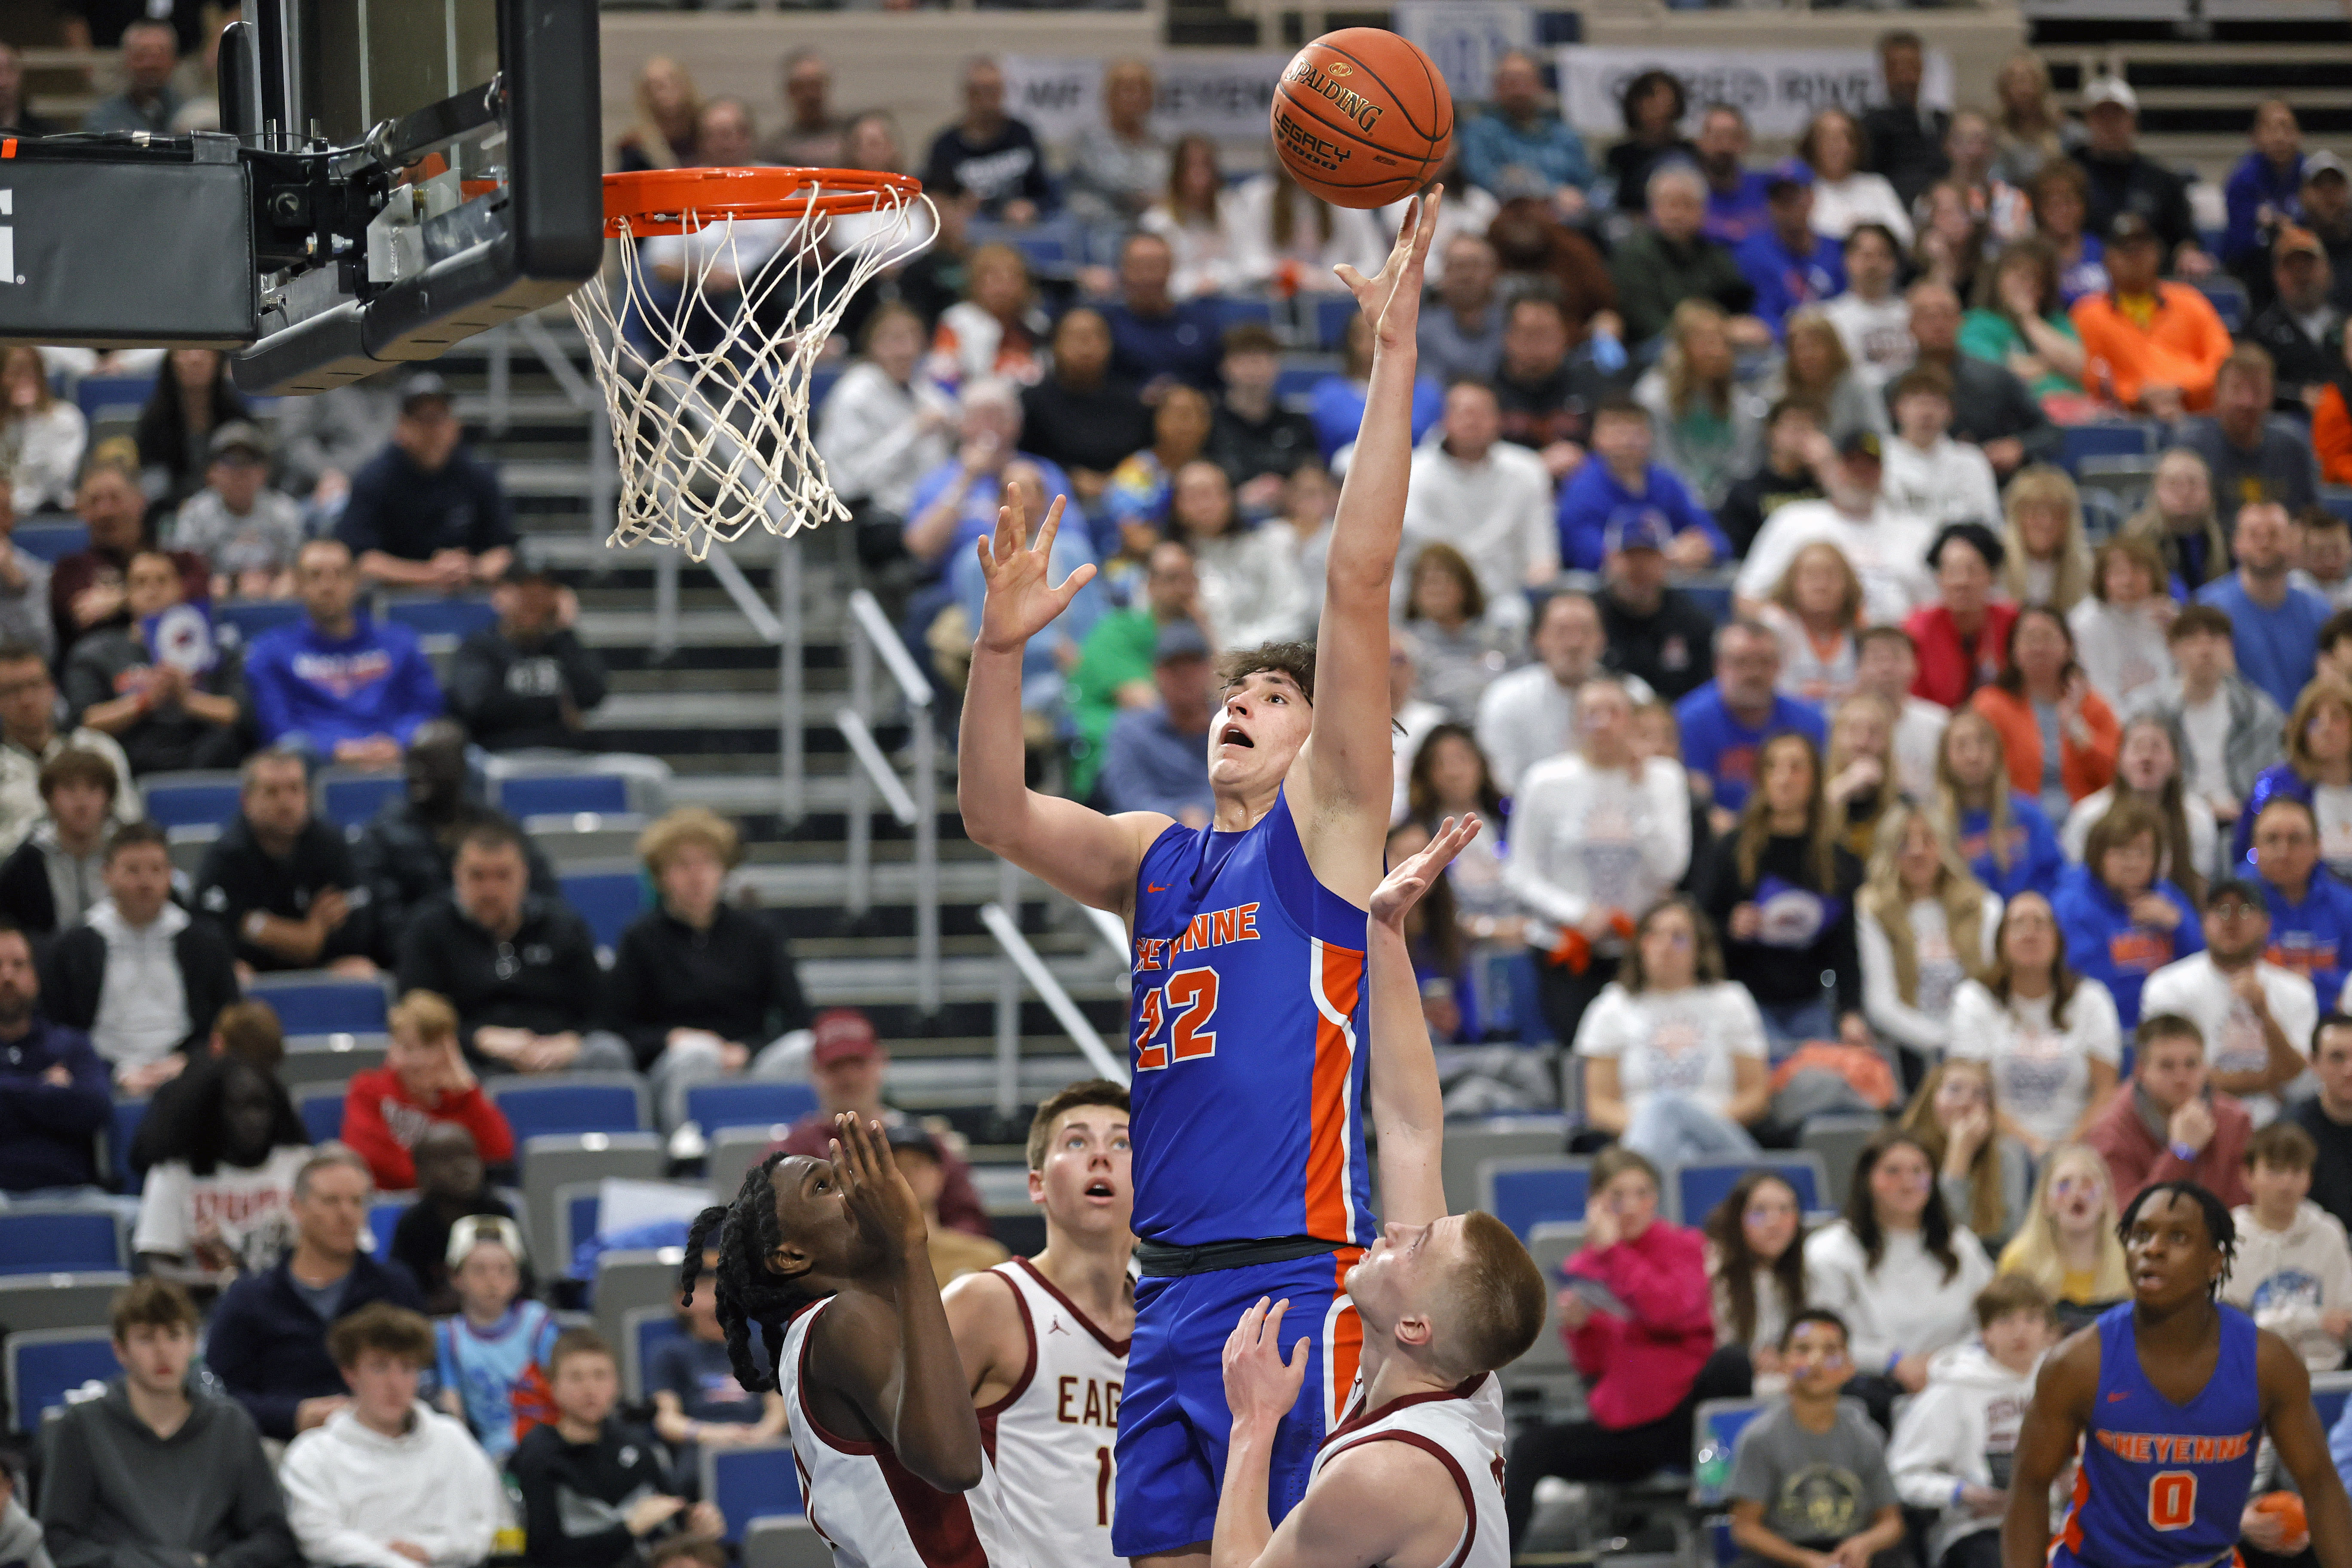 West Fargo Sheyenne's Tommy Ahneman gets Big Ten offer as D-I interest continues to grow